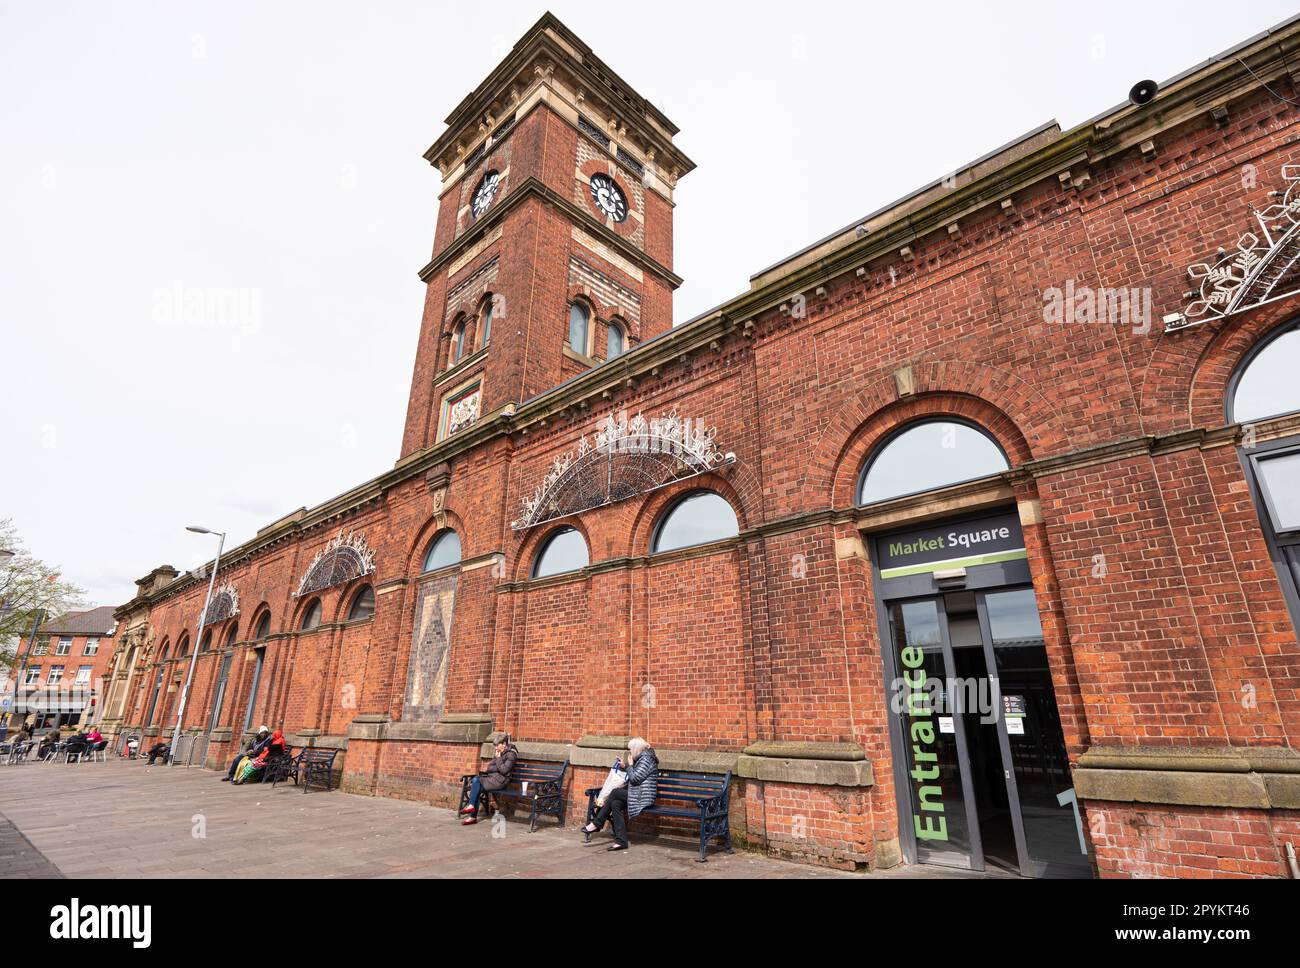 Market Hall with clock tower, Market Square, Ashton-under-Lyne. Market town near Manchester borough of Tameside.. Picture: garyroberts Stock Photo